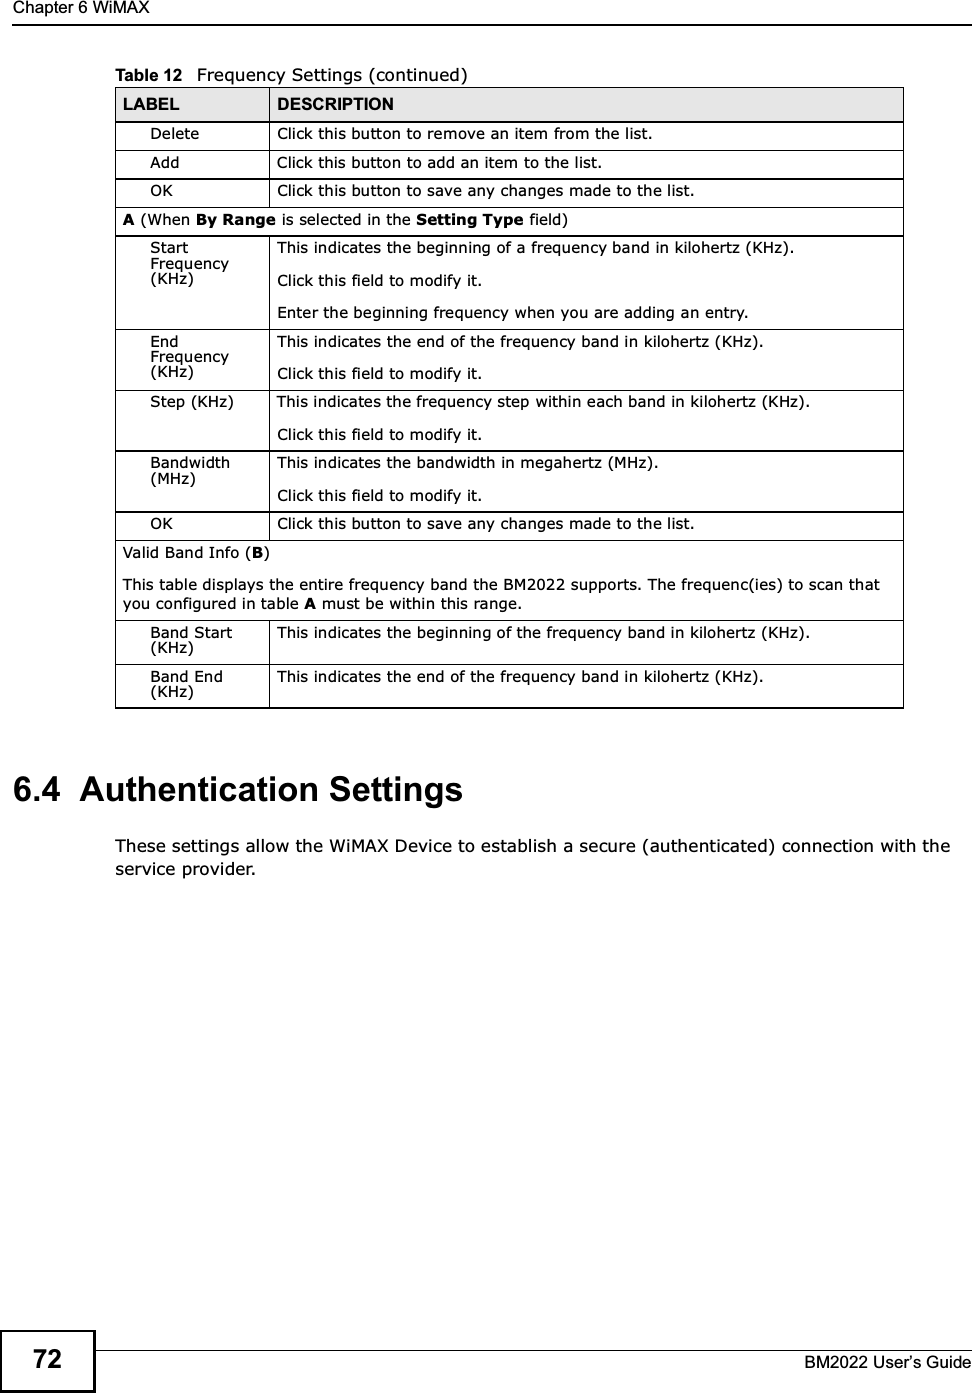 Chapter 6 WiMAXBM2022 Users Guide726.4  Authentication SettingsThese settings allow the WiMAX Device to establish a secure (authenticated) connection with the service provider.Delete Click this button to remove an item from the list.Add Click this button to add an item to the list.OK Click this button to save any changes made to the list.A (When By Range is selected in the Setting Type field)Start Frequency (KHz)This indicates the beginning of a frequency band in kilohertz (KHz).Click this field to modify it.Enter the beginning frequency when you are adding an entry.End Frequency (KHz)This indicates the end of the frequency band in kilohertz (KHz).Click this field to modify it.Step (KHz) This indicates the frequency step within each band in kilohertz (KHz).Click this field to modify it.Bandwidth (MHz)This indicates the bandwidth in megahertz (MHz).Click this field to modify it.OK Click this button to save any changes made to the list.Valid Band Info (B)This table displays the entire frequency band the BM2022 supports. The frequenc(ies) to scan that you configured in table A must be within this range.Band Start (KHz)This indicates the beginning of the frequency band in kilohertz (KHz).Band End (KHz)This indicates the end of the frequency band in kilohertz (KHz).Table 12   Frequency Settings (continued)LABEL DESCRIPTION